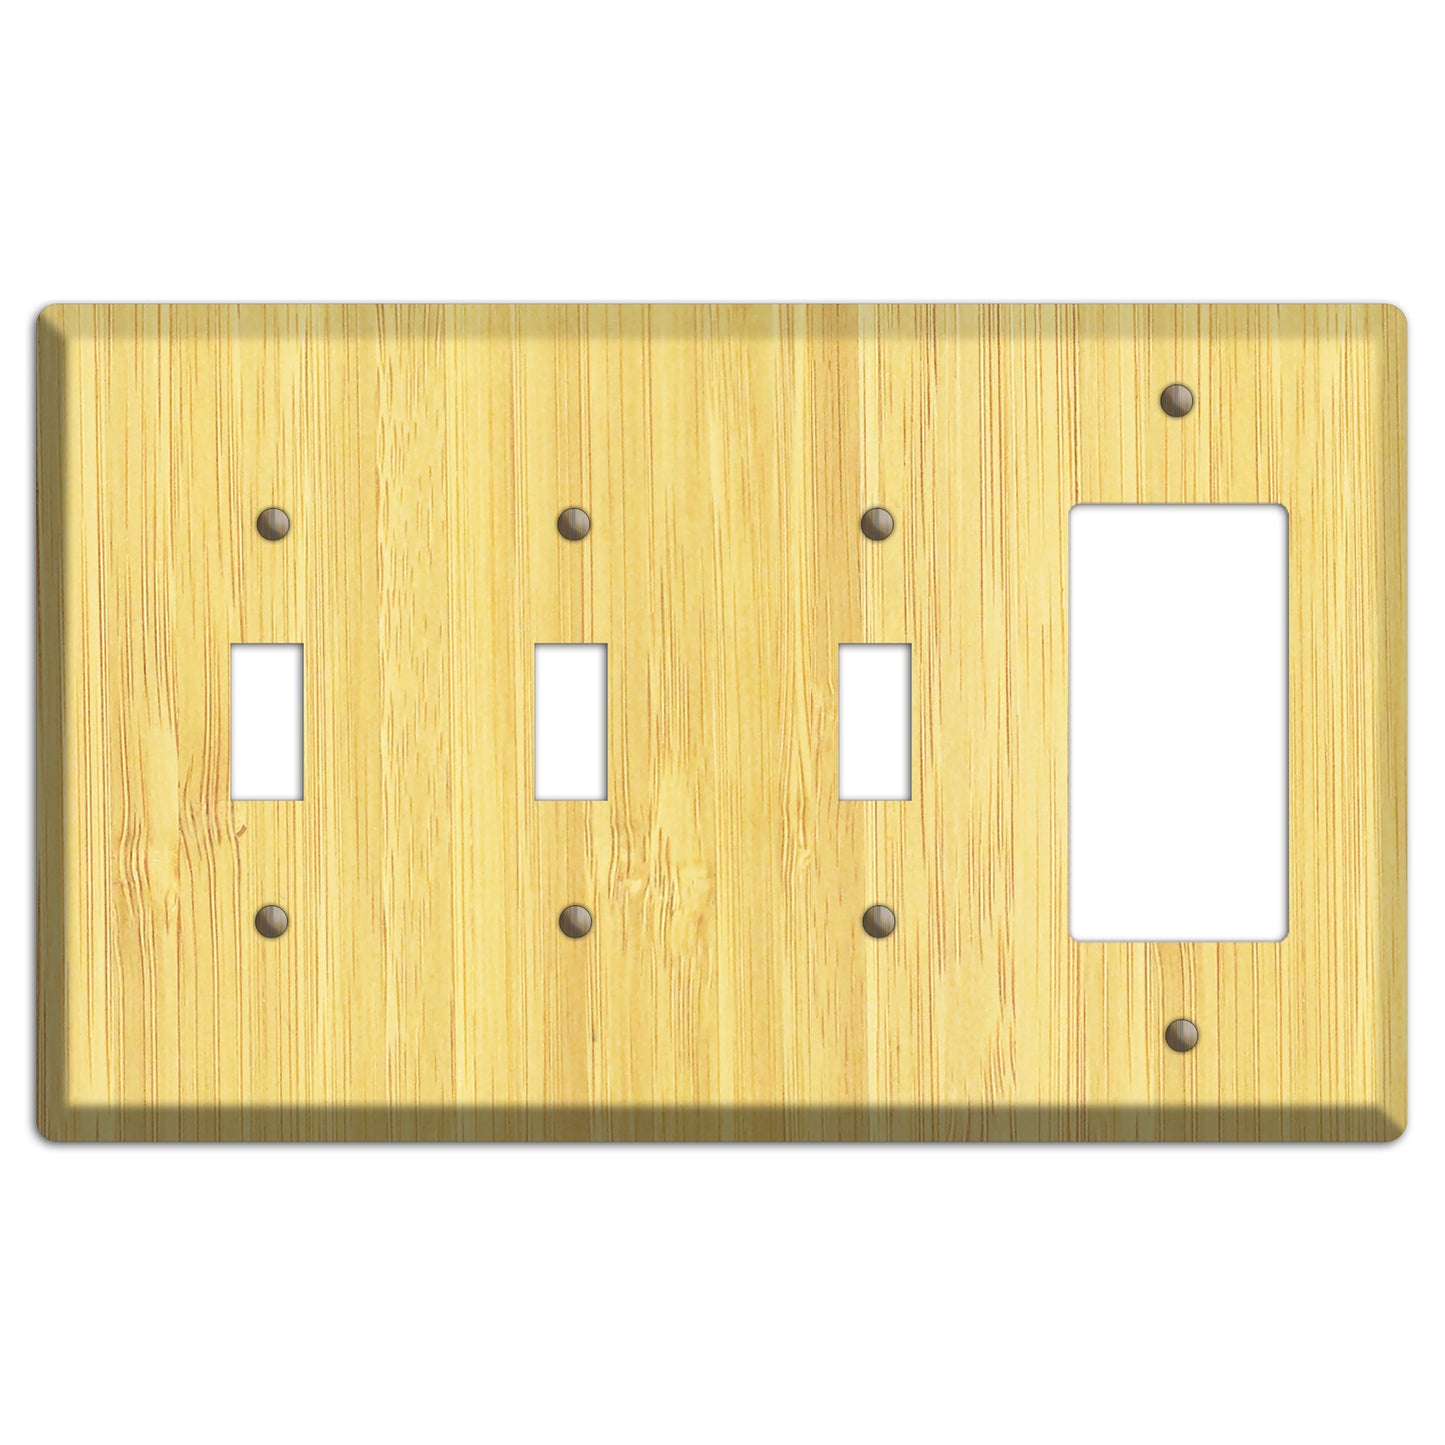 Natural Bamboo Wood 3 Toggle / Rocker Outlet Cover Plate